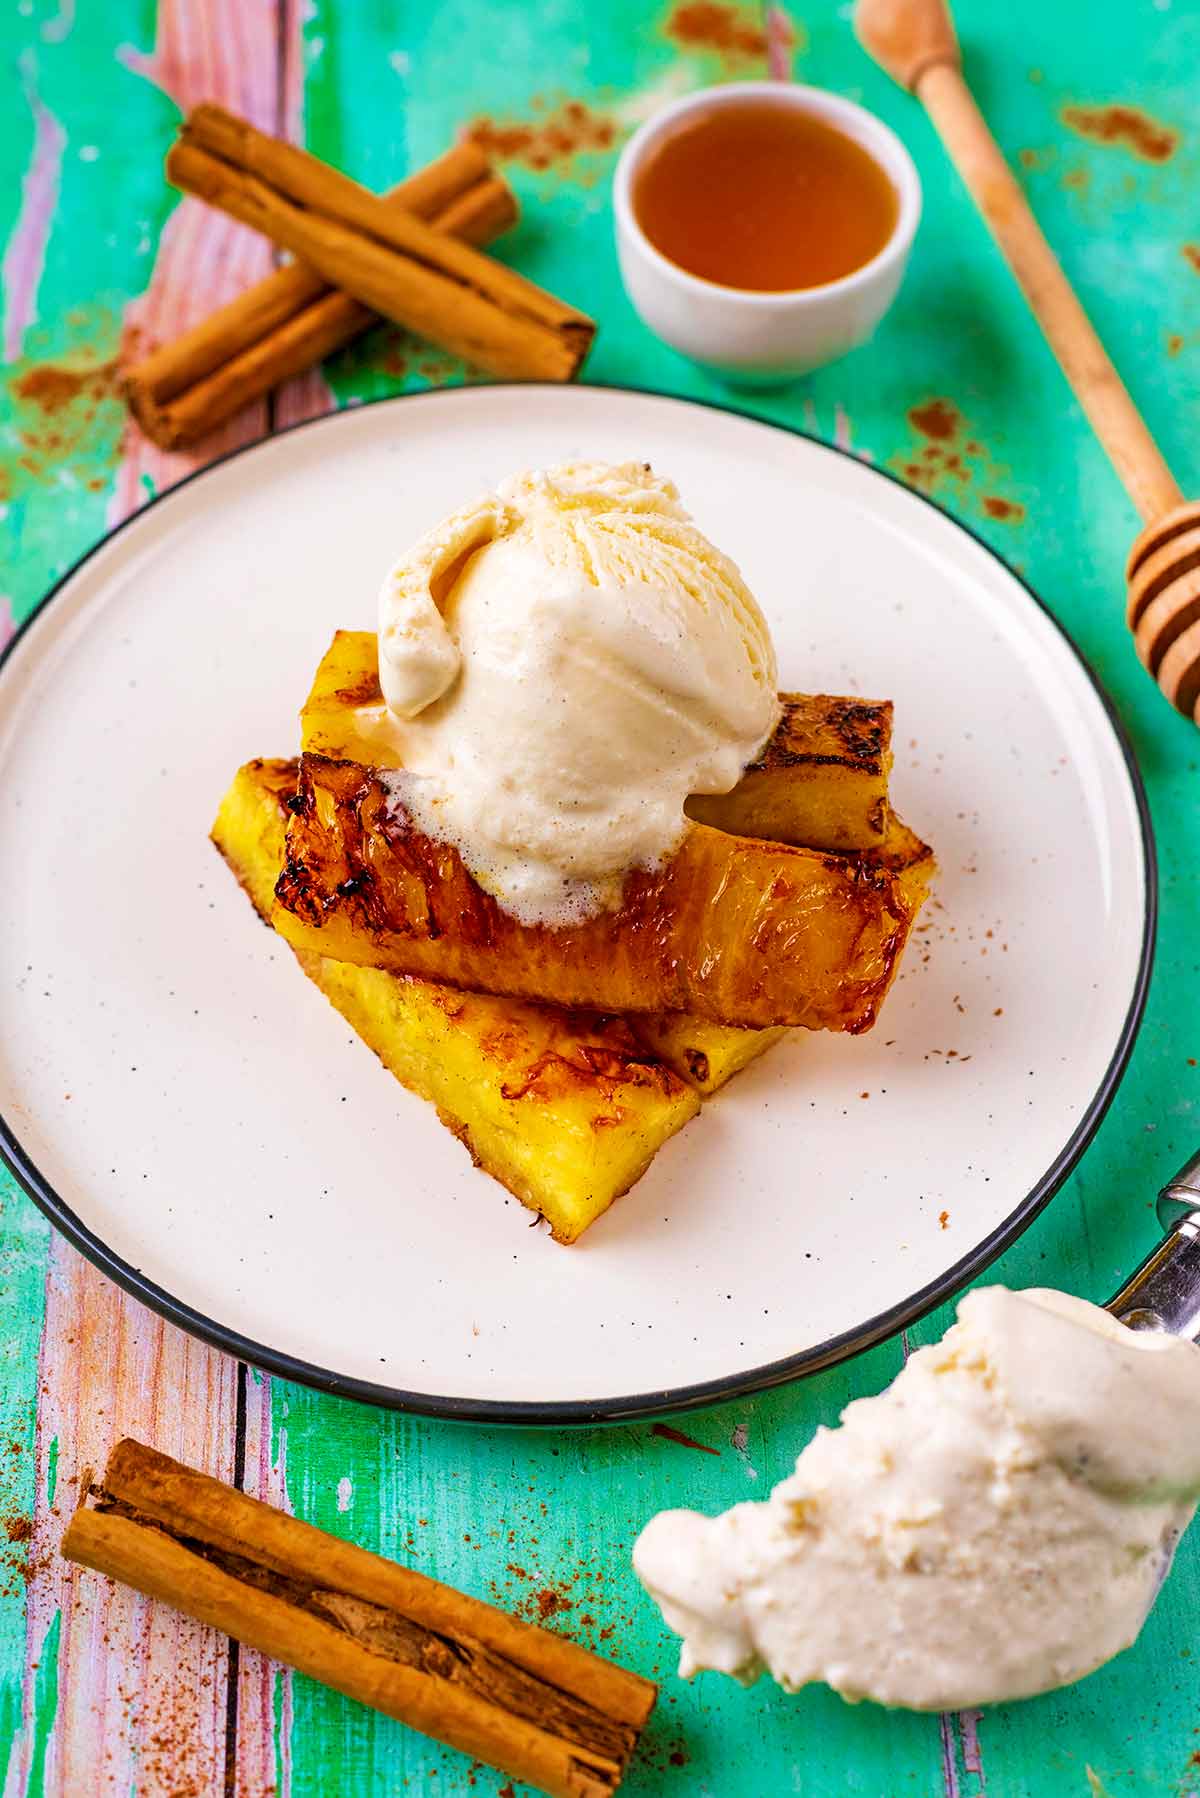 Grilled fingers of pineapple on a plate with a ball of vanilla ice cream.